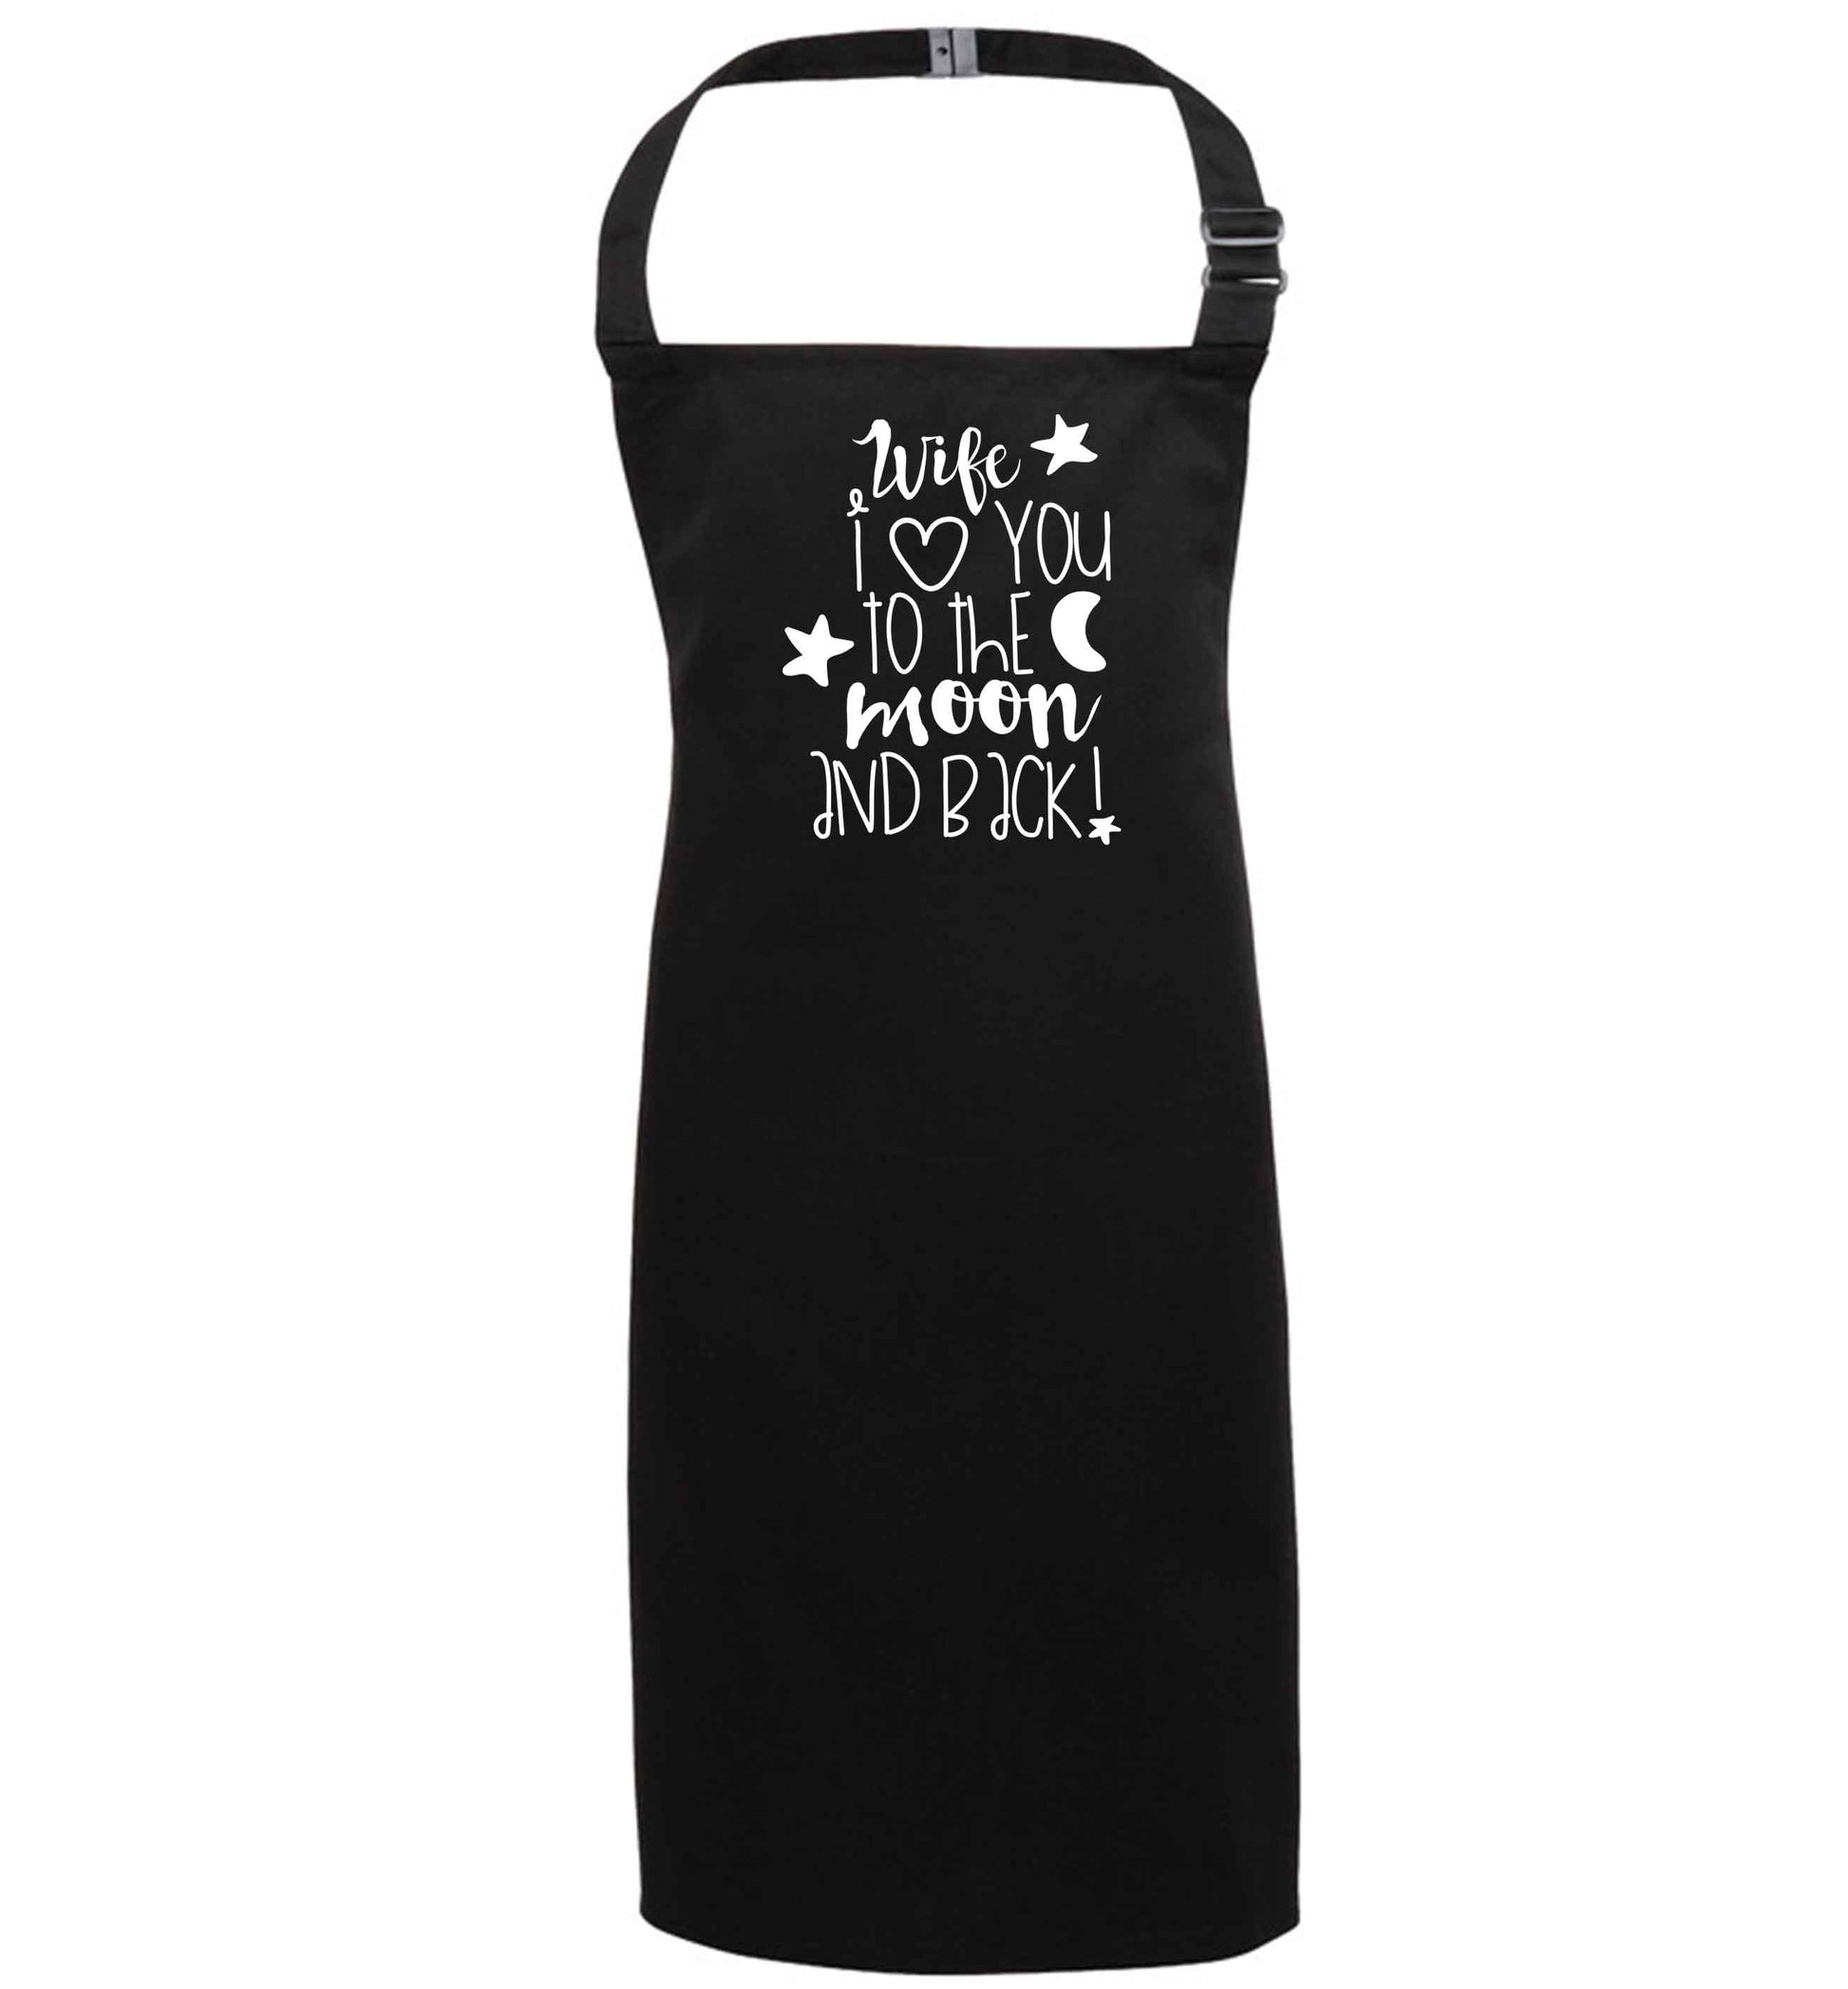 Wife I love you to the moon and back black apron 7-10 years